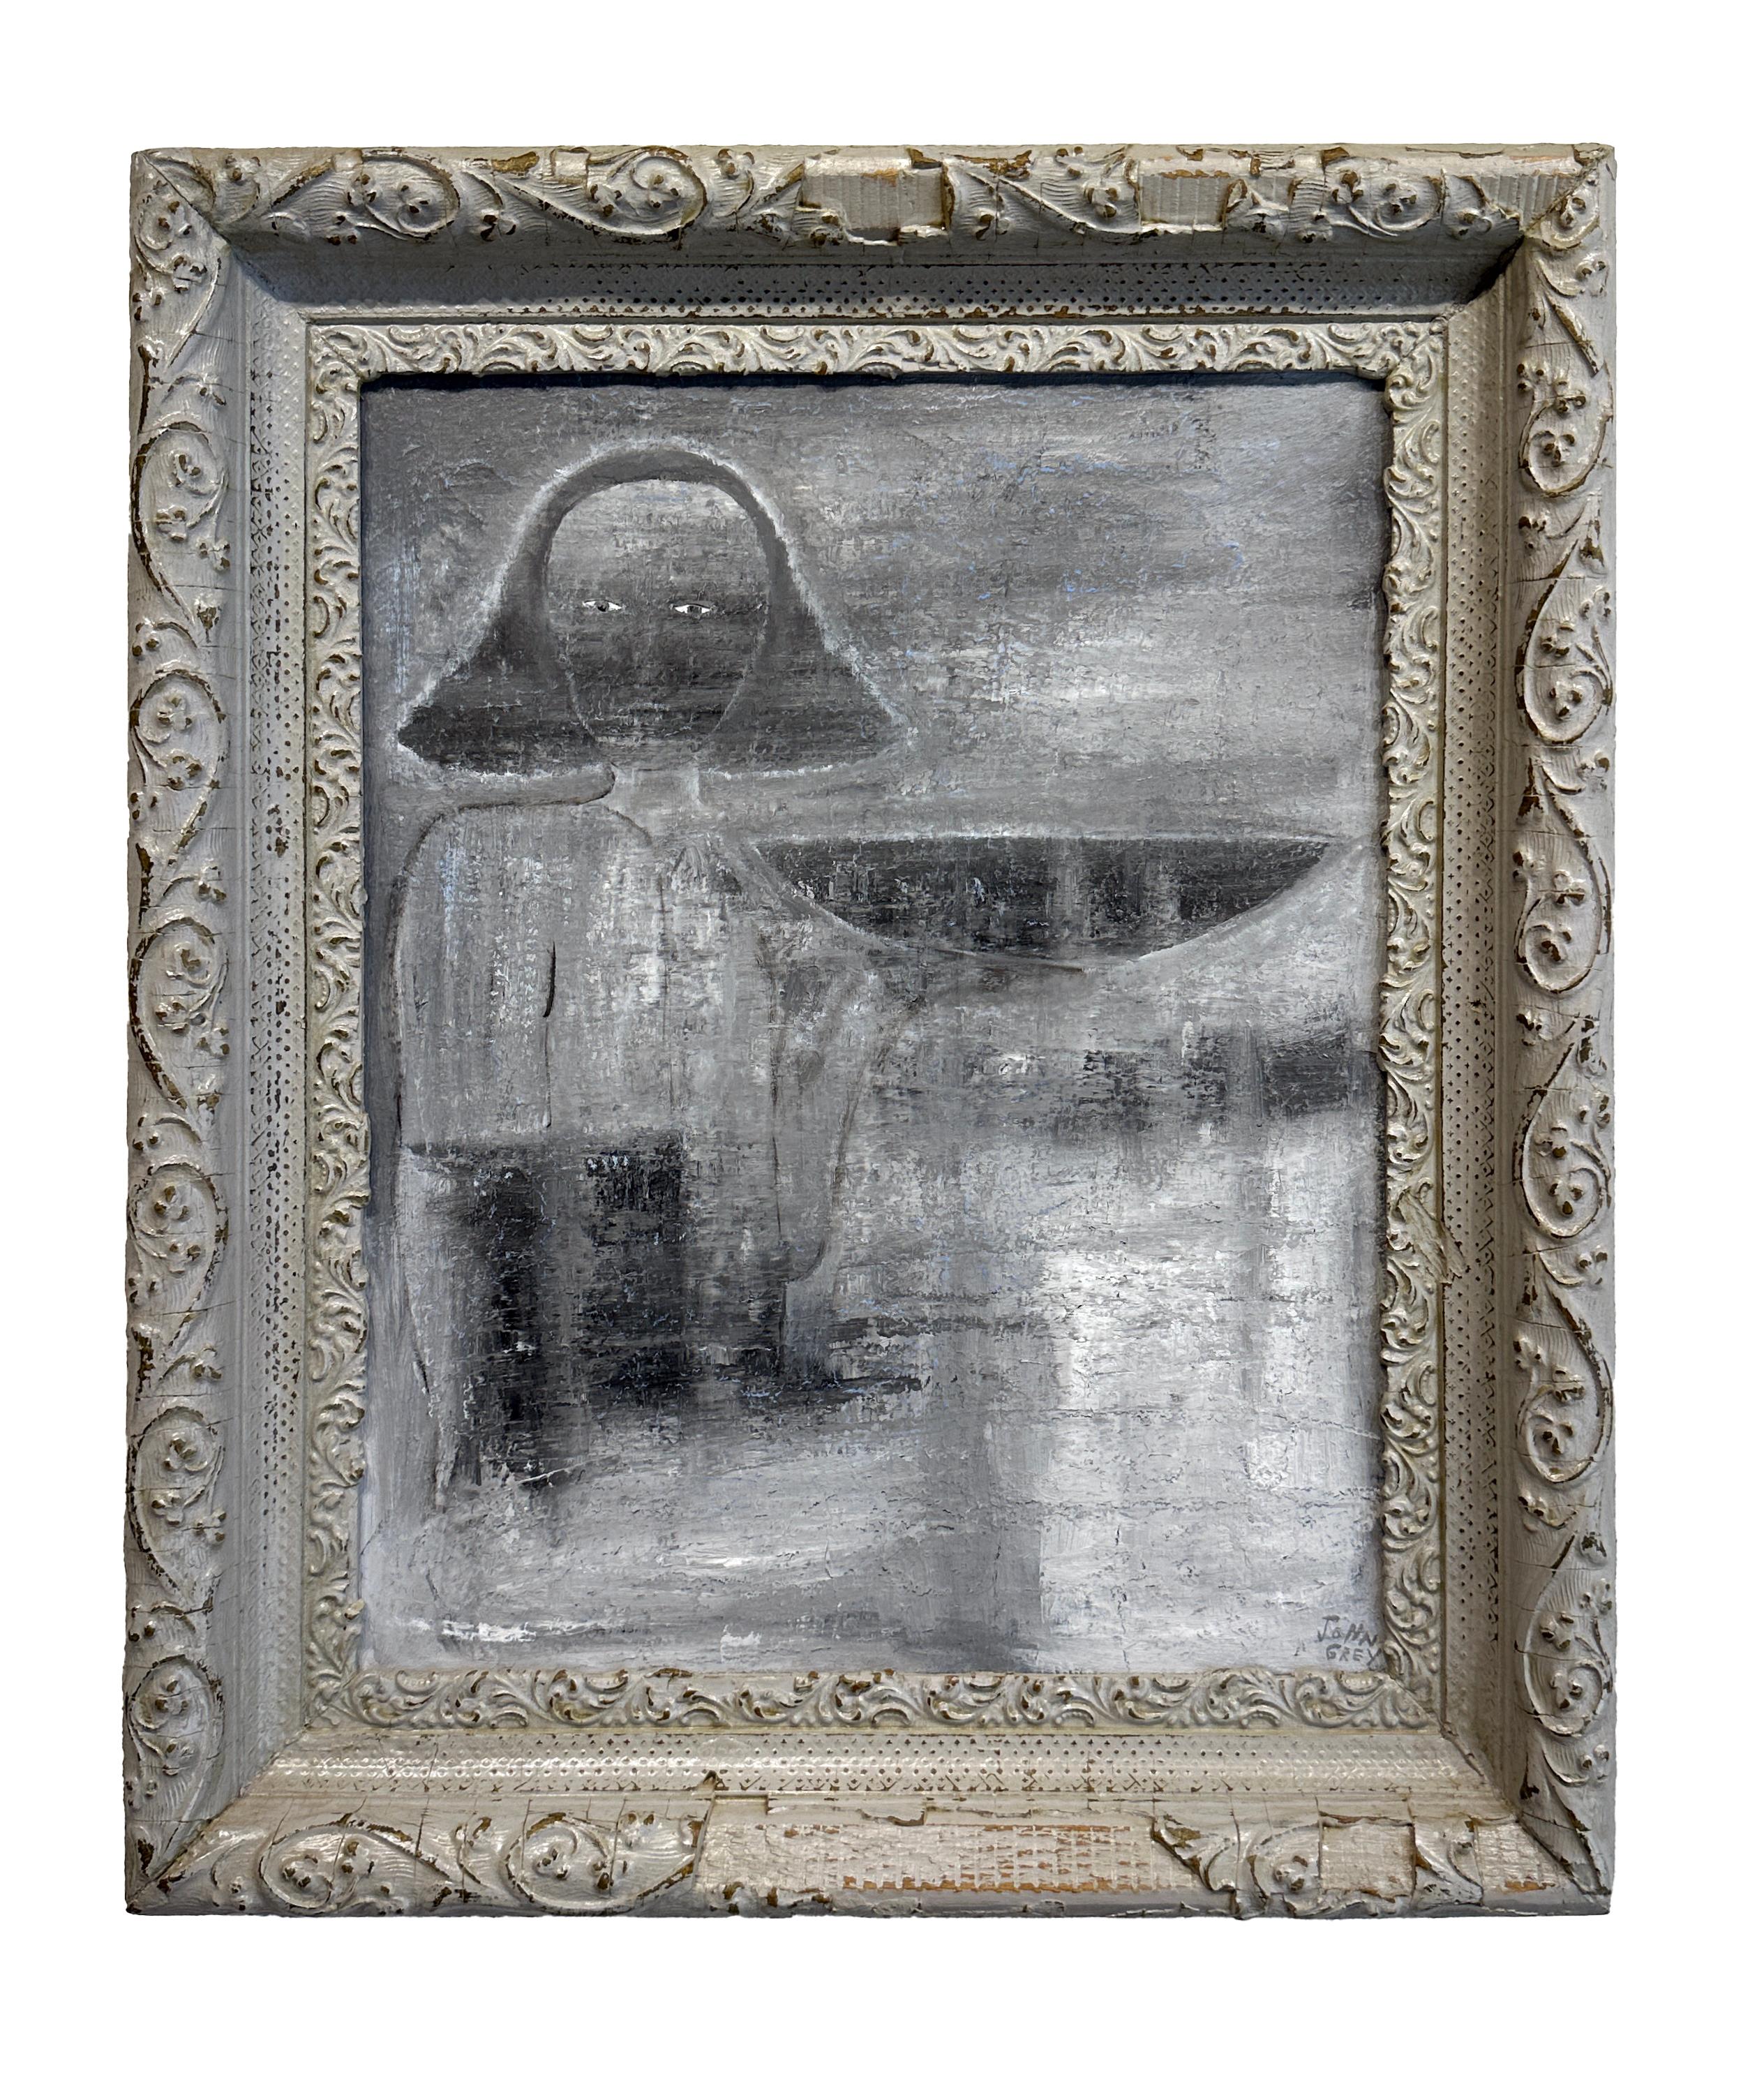 John Seubert Portrait Painting - Enigma - Surreal Scene With Figure in Muted Greys, Original Oil on Canvas Framed